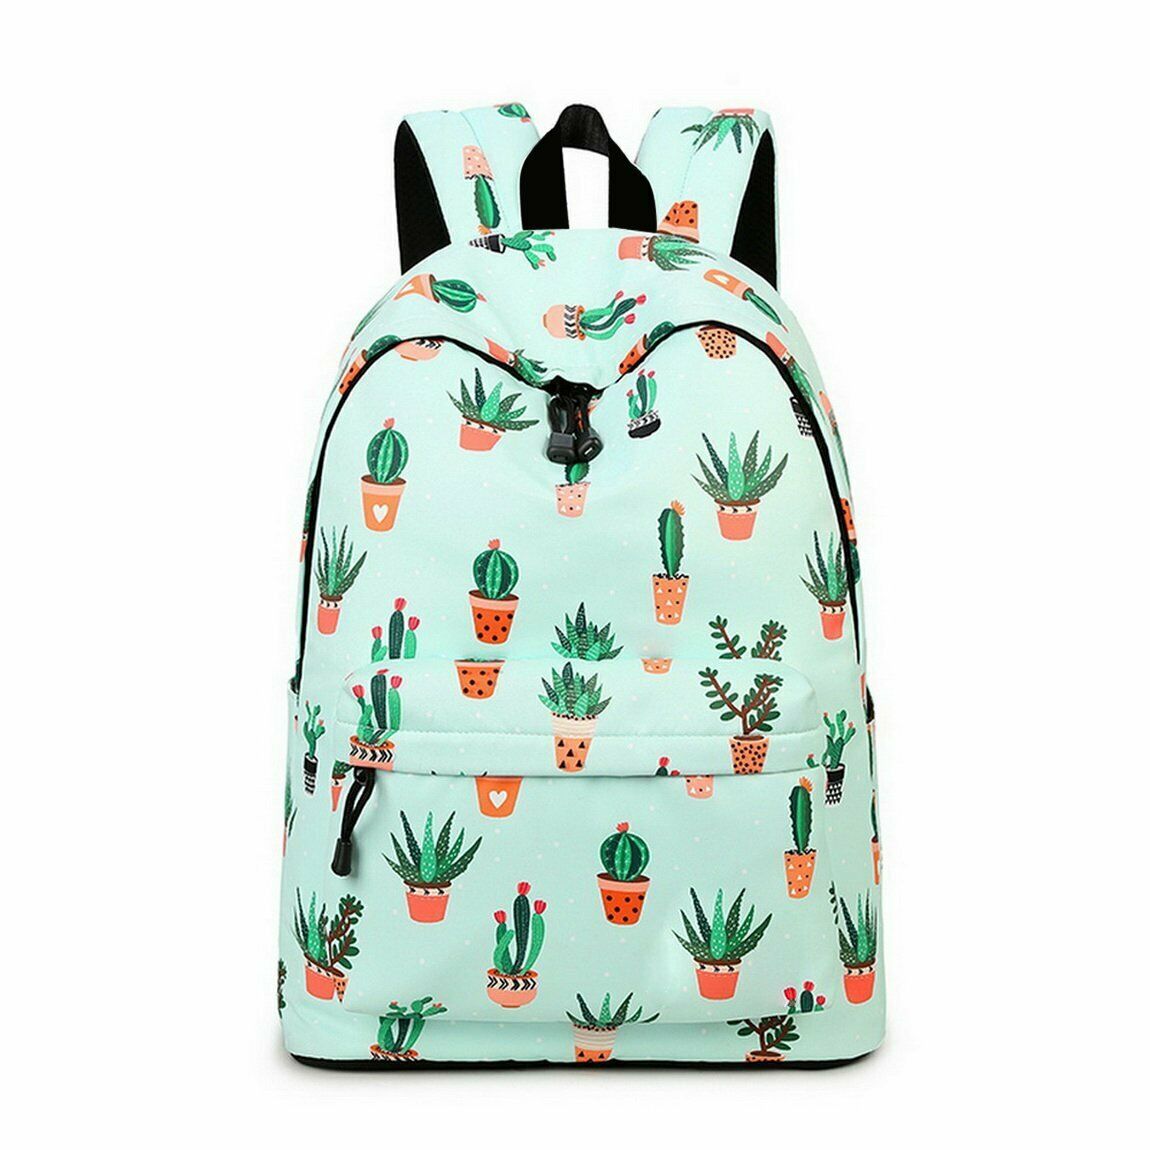 Primary image for Cactus Backpack School Bag Green Mint Back to School Laptop Sleeve Succulent